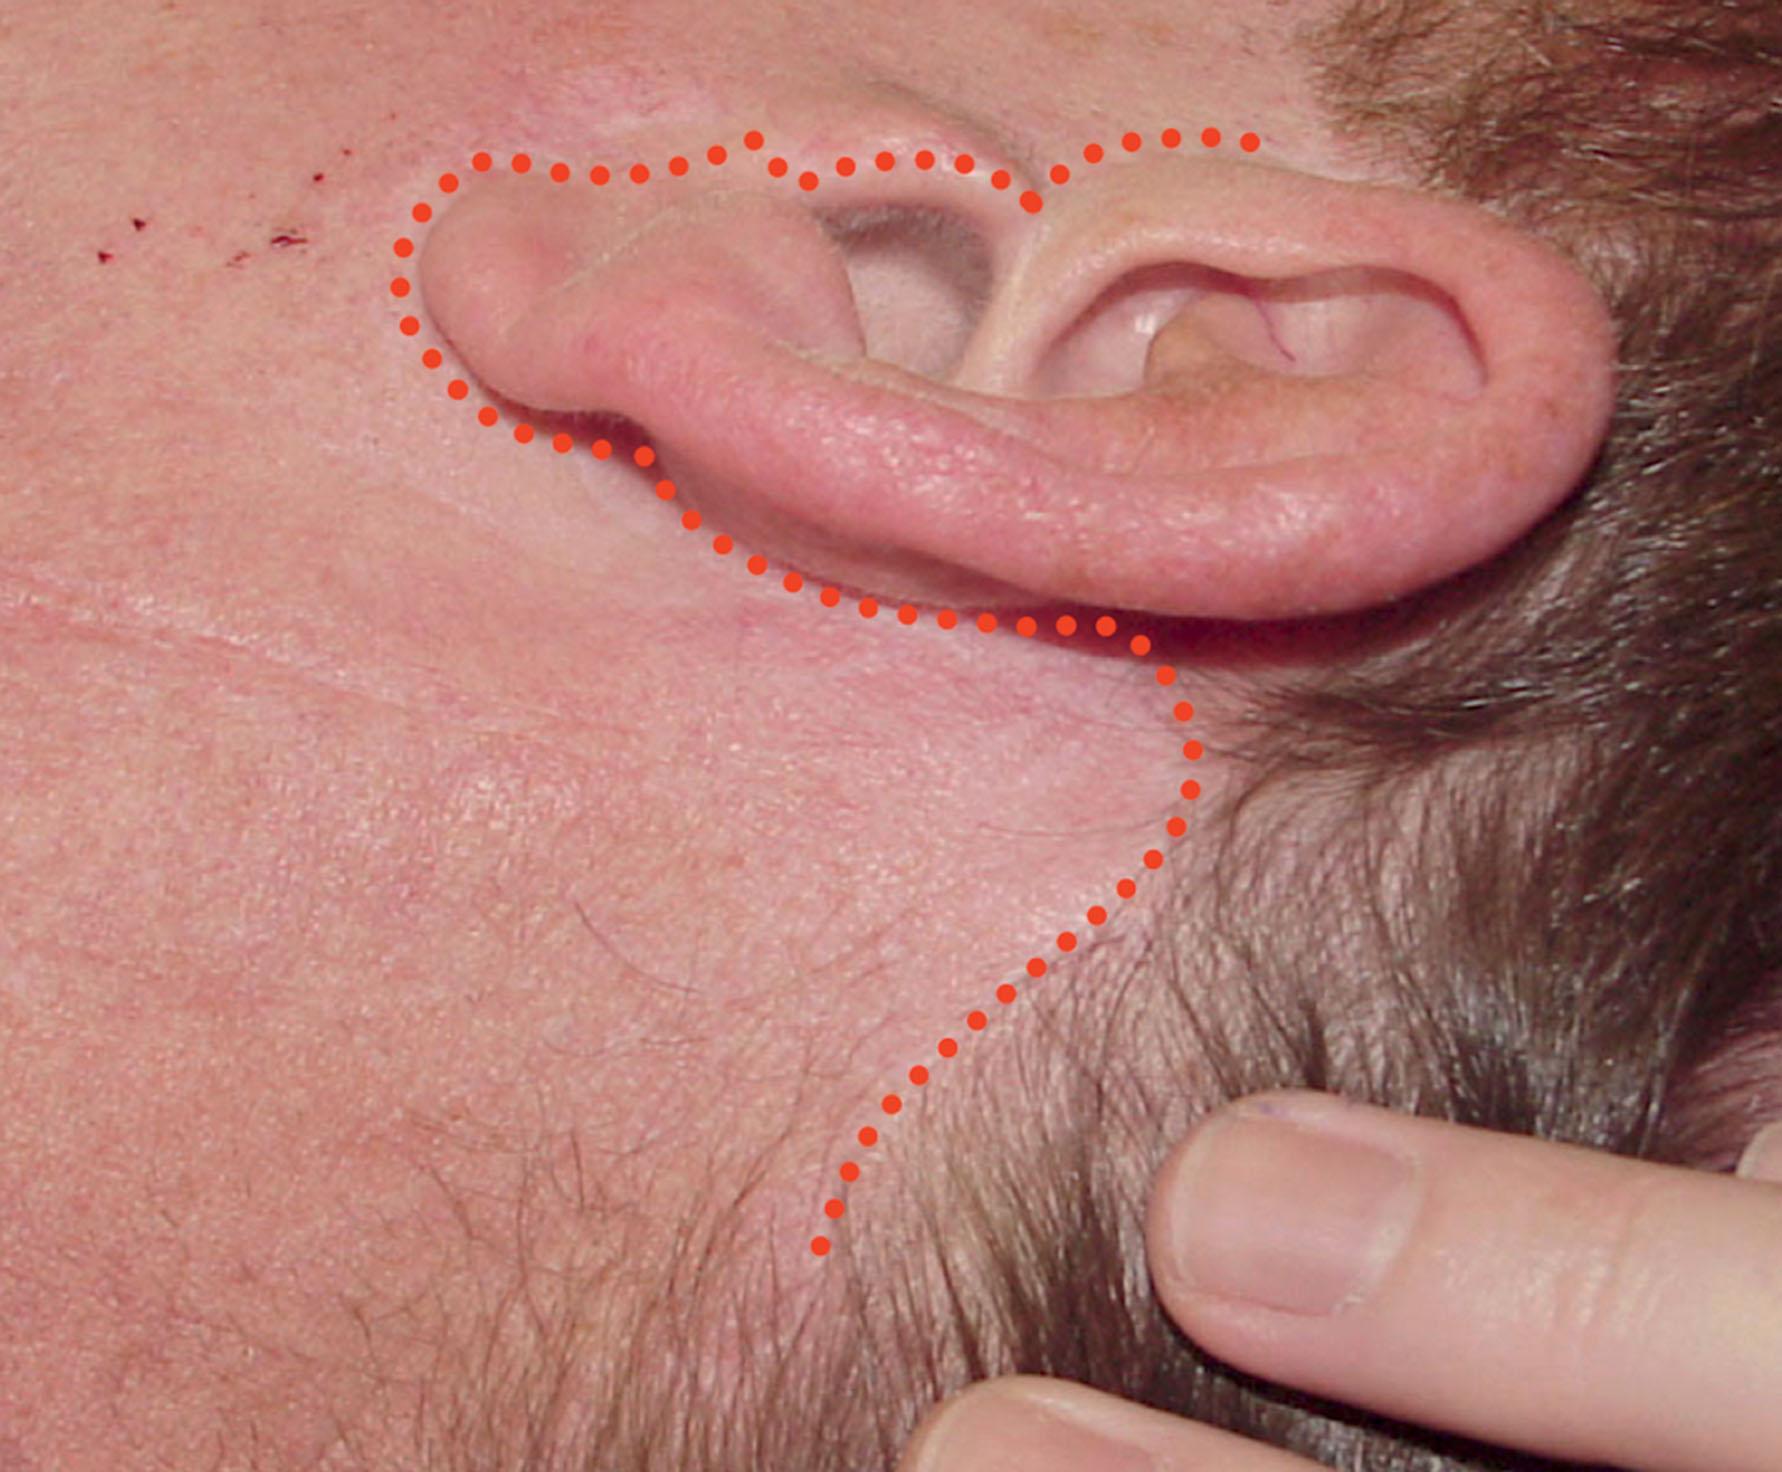 Figure 9.11.5, Extended necklift incision plan. The incision plan for an “extended necklift” is similar to the typical periauricular facelift incision plan without the temporal portion of the incision. This incision plan allows some lower facial skin to be excised and a “low” superficial musculo-aponeurotic system (SMAS) flap to be elevated and advanced (or low SMAS plication or SMAS stacking to be performed) that provides improvement in the lower face and along the jawline that would not otherwise be obtained if an isolated necklift (short scar necklift) only was performed.